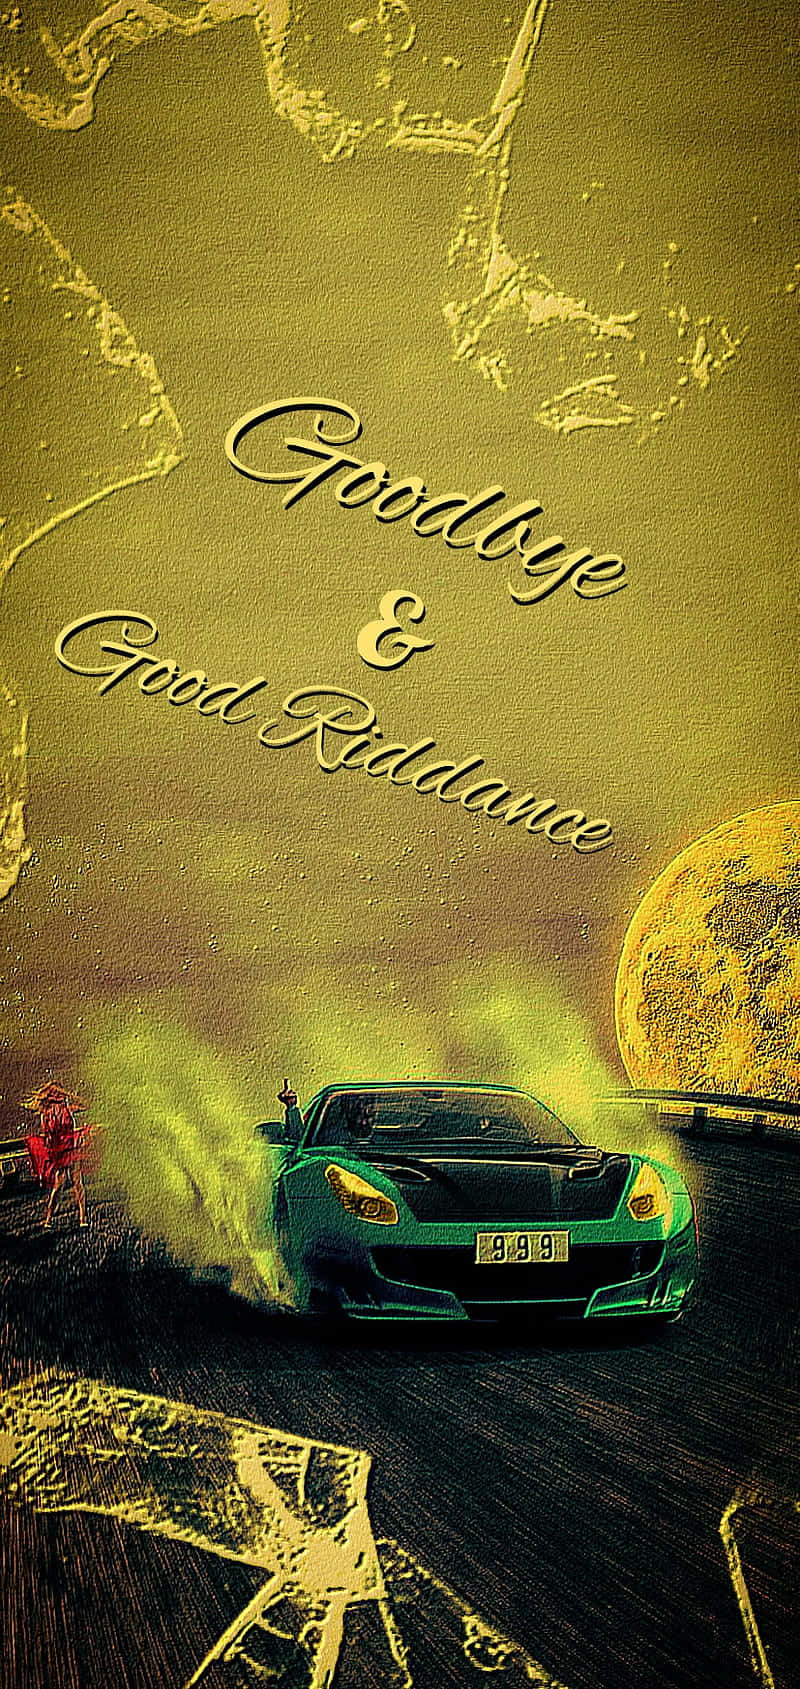 Goodbye and Good Riddance - Life may not always be easy, but don't forget to say goodbye and find joy in the next journey. Wallpaper